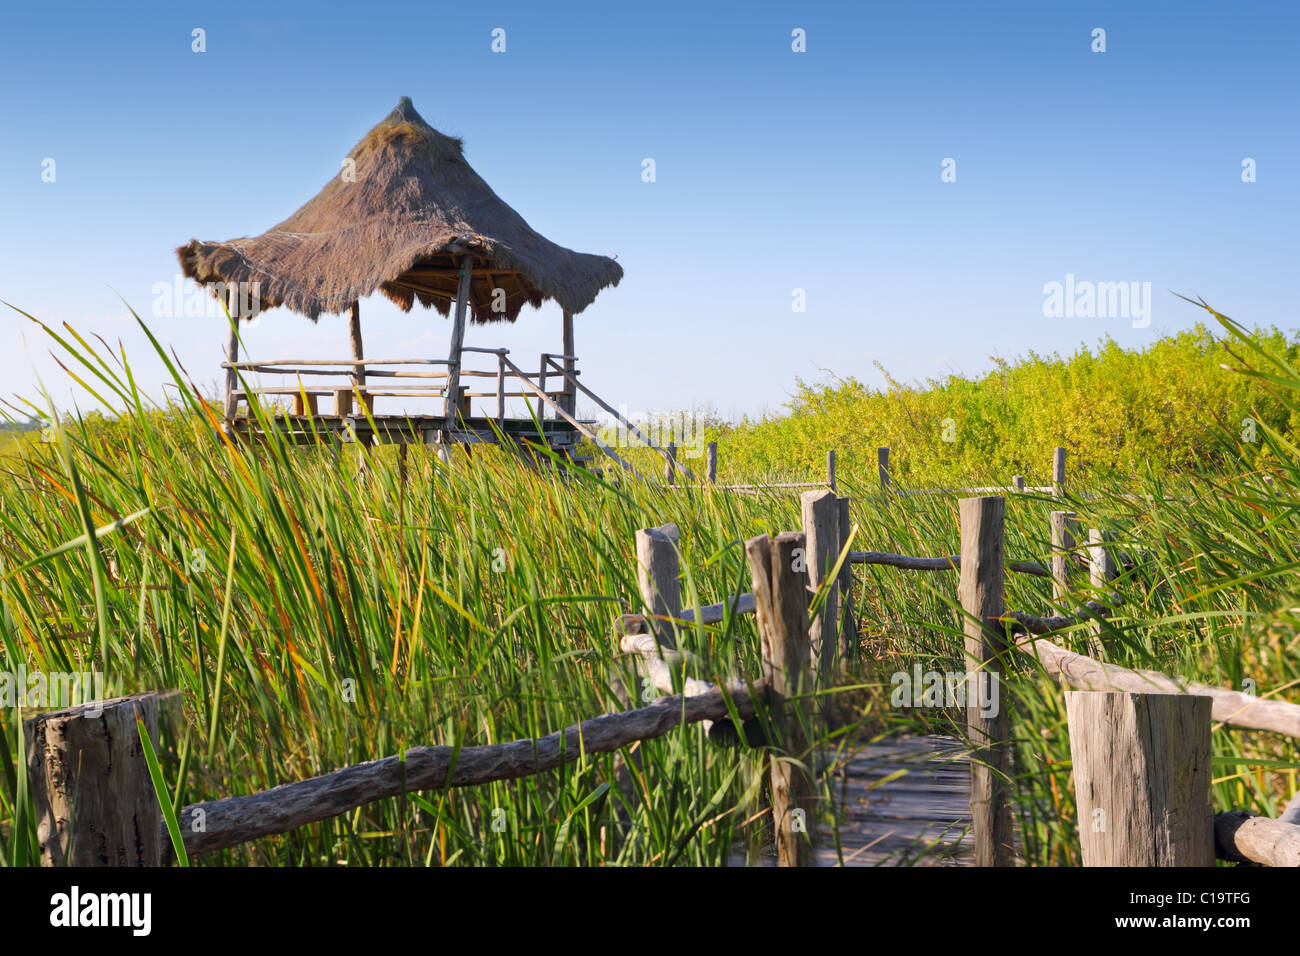 hut palapa in mangrove reed wetlands in mexico Stock Photo